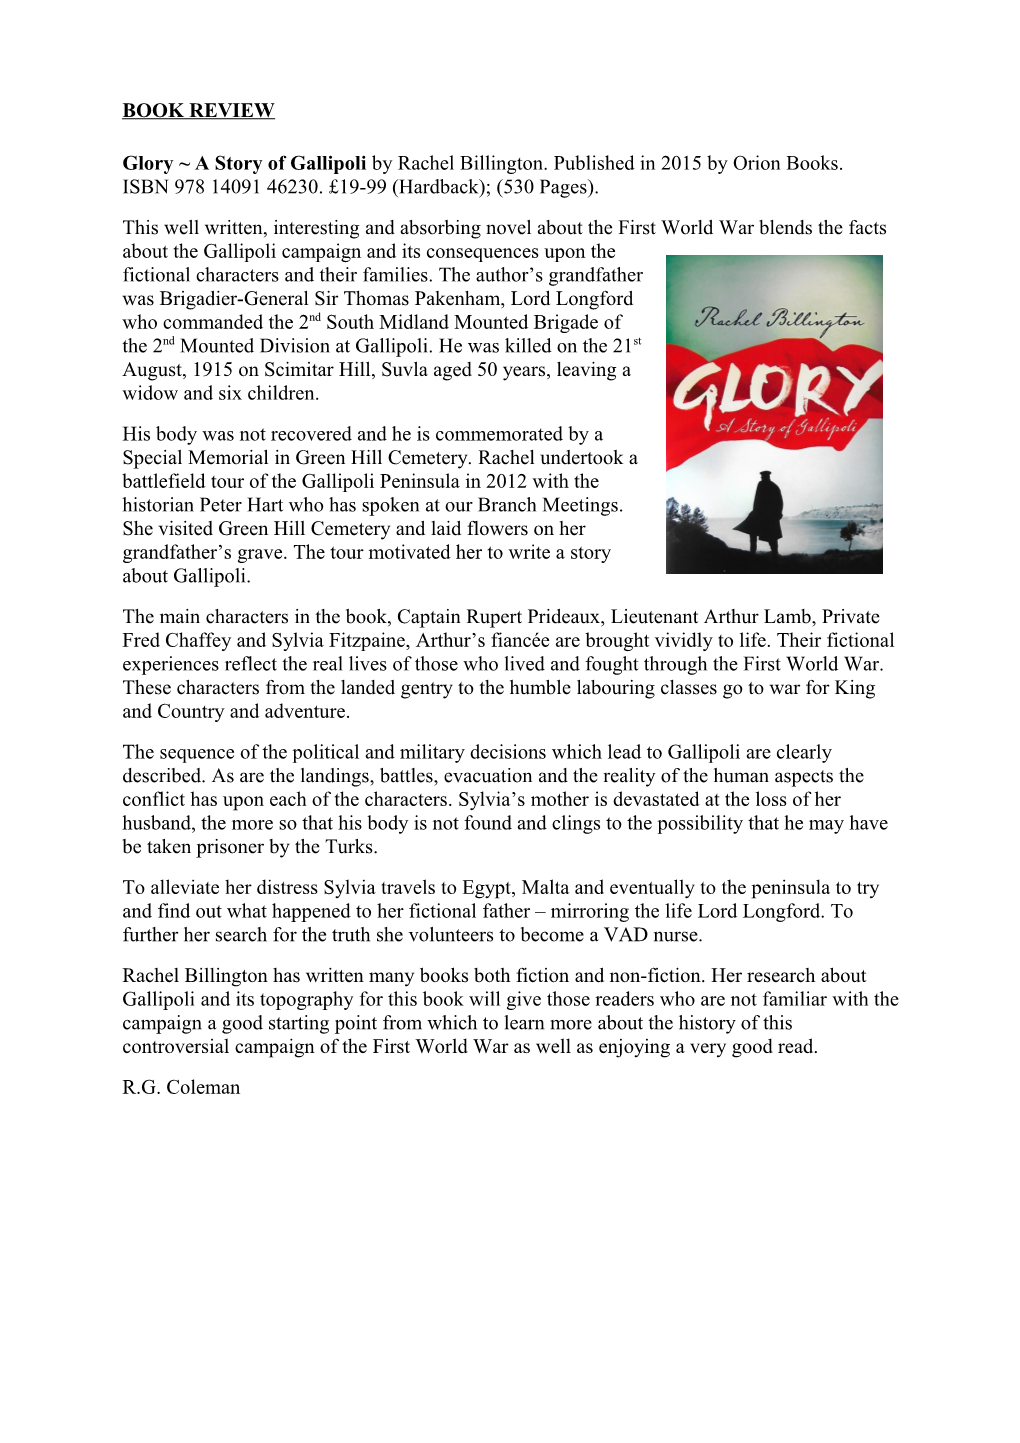 Glory a Story of Gallipoli by Rachel Billington. Published in 2015 by Orion Books. ISBN